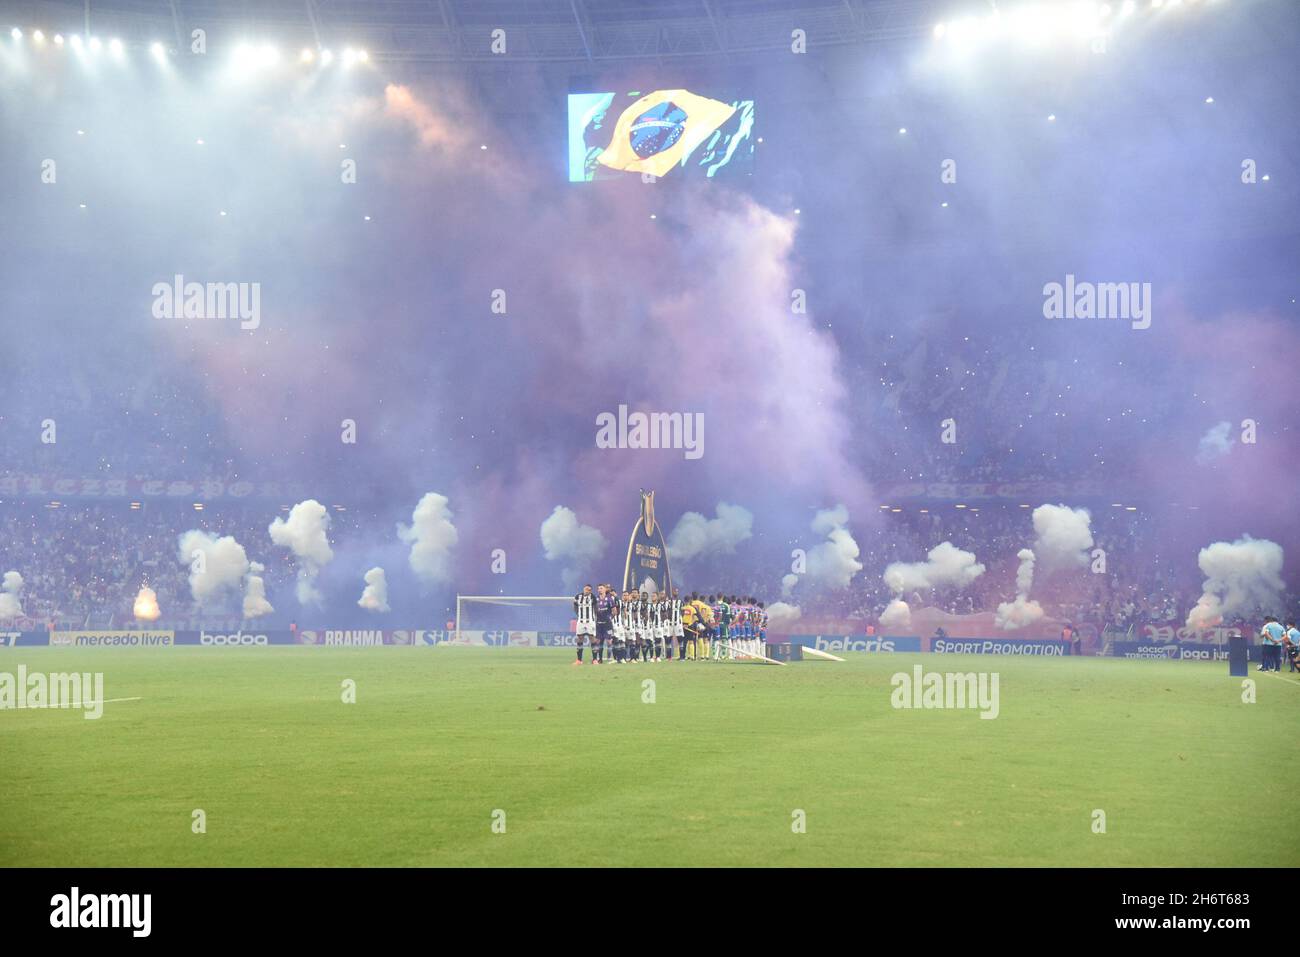 Fortaleza, Brazil. 17th Nov, 2021. Smoke during a match between Fortaleza EC x Ceará SC, valid match of the 33rd round of the Brazilian Championship, this Wednesday (17th) at Arena Castelão. Caior Rocha/SPP Credit: SPP Sport Press Photo. /Alamy Live News Stock Photo